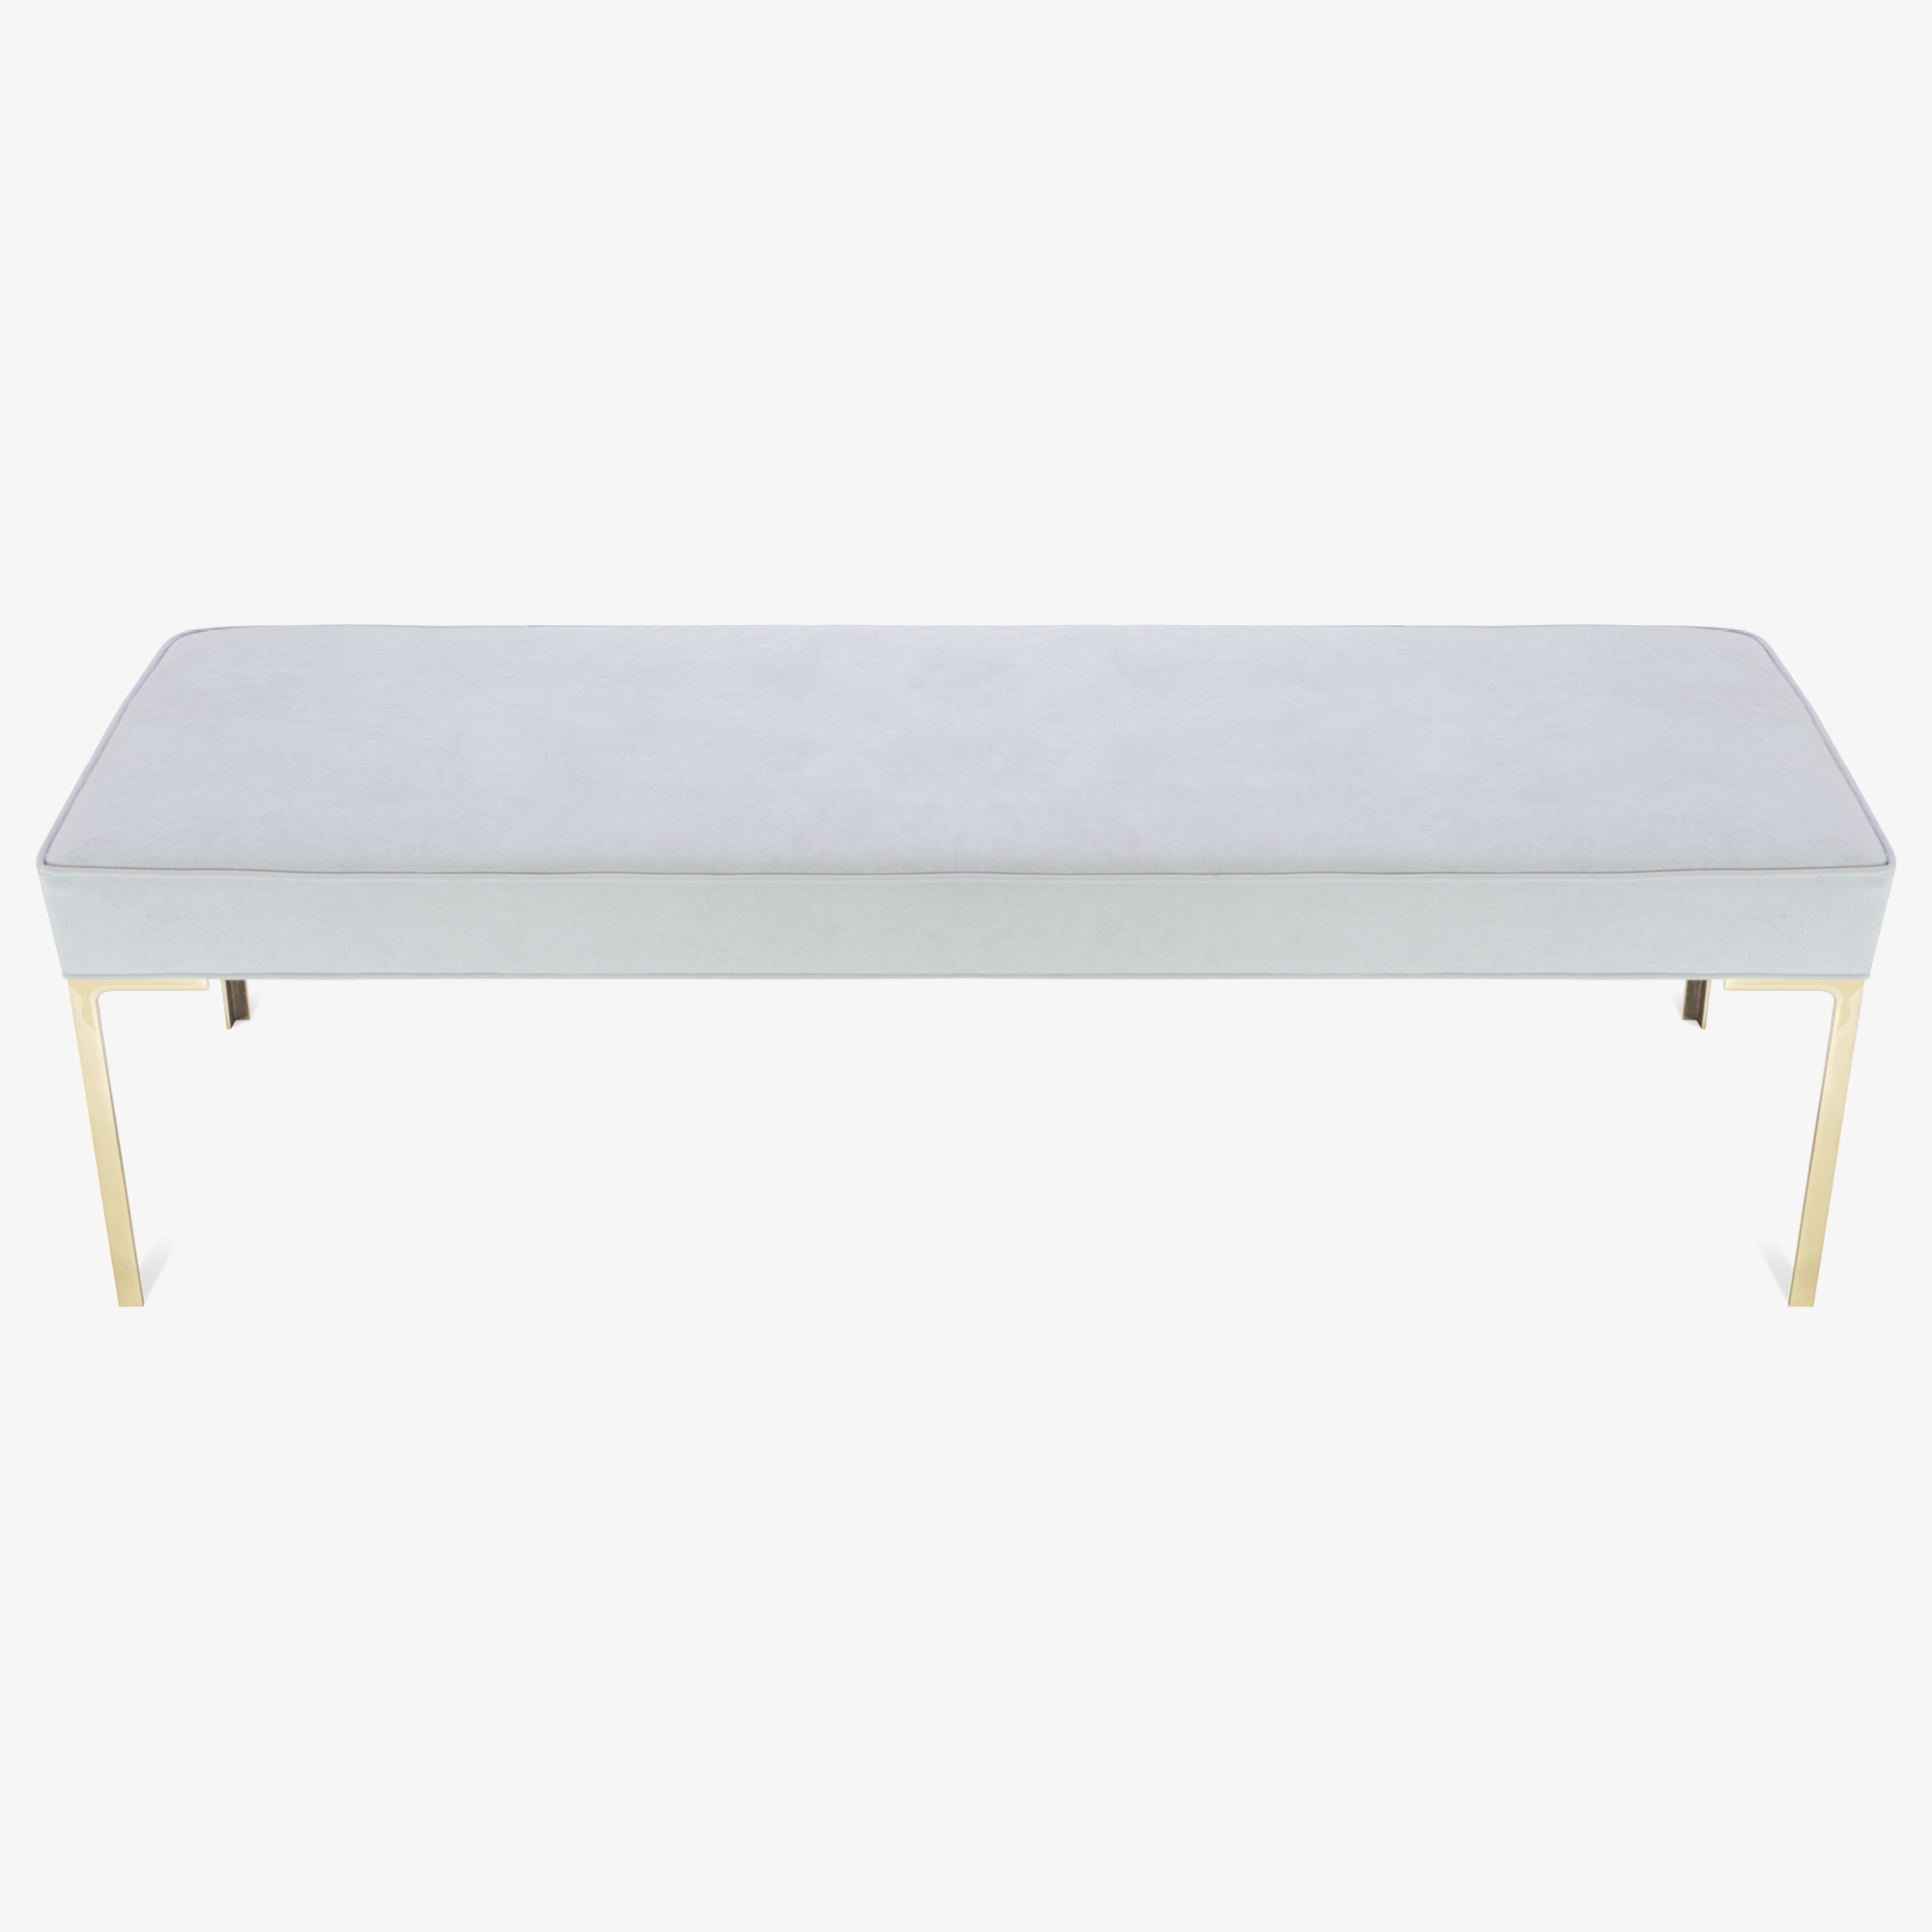 Astor 60%22 Brass Bench in Dove Luxe Suede2.png